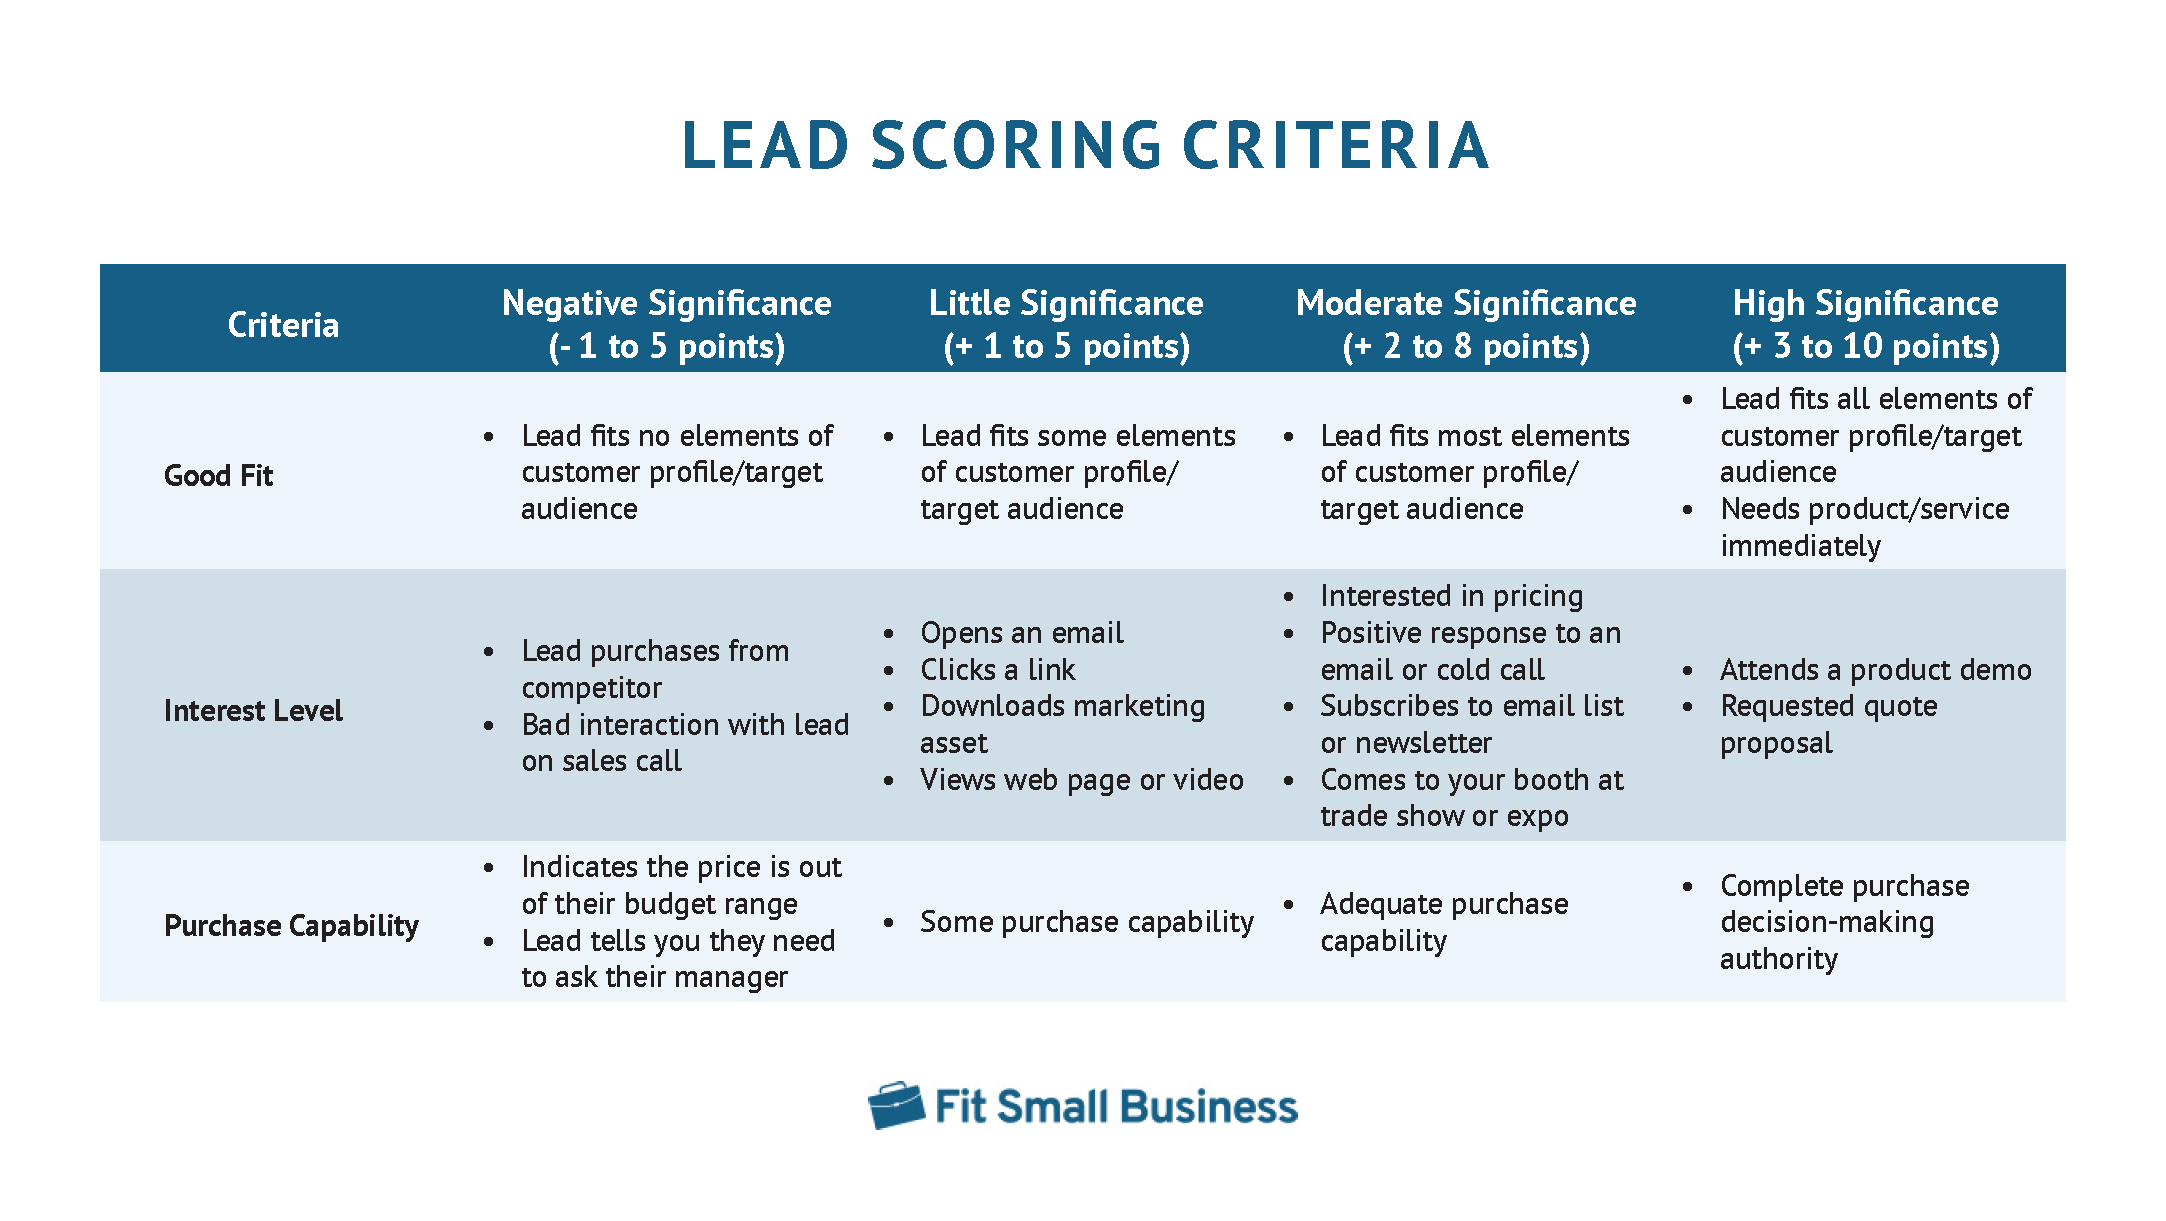 The chart shows examples of how to do lead scoring.